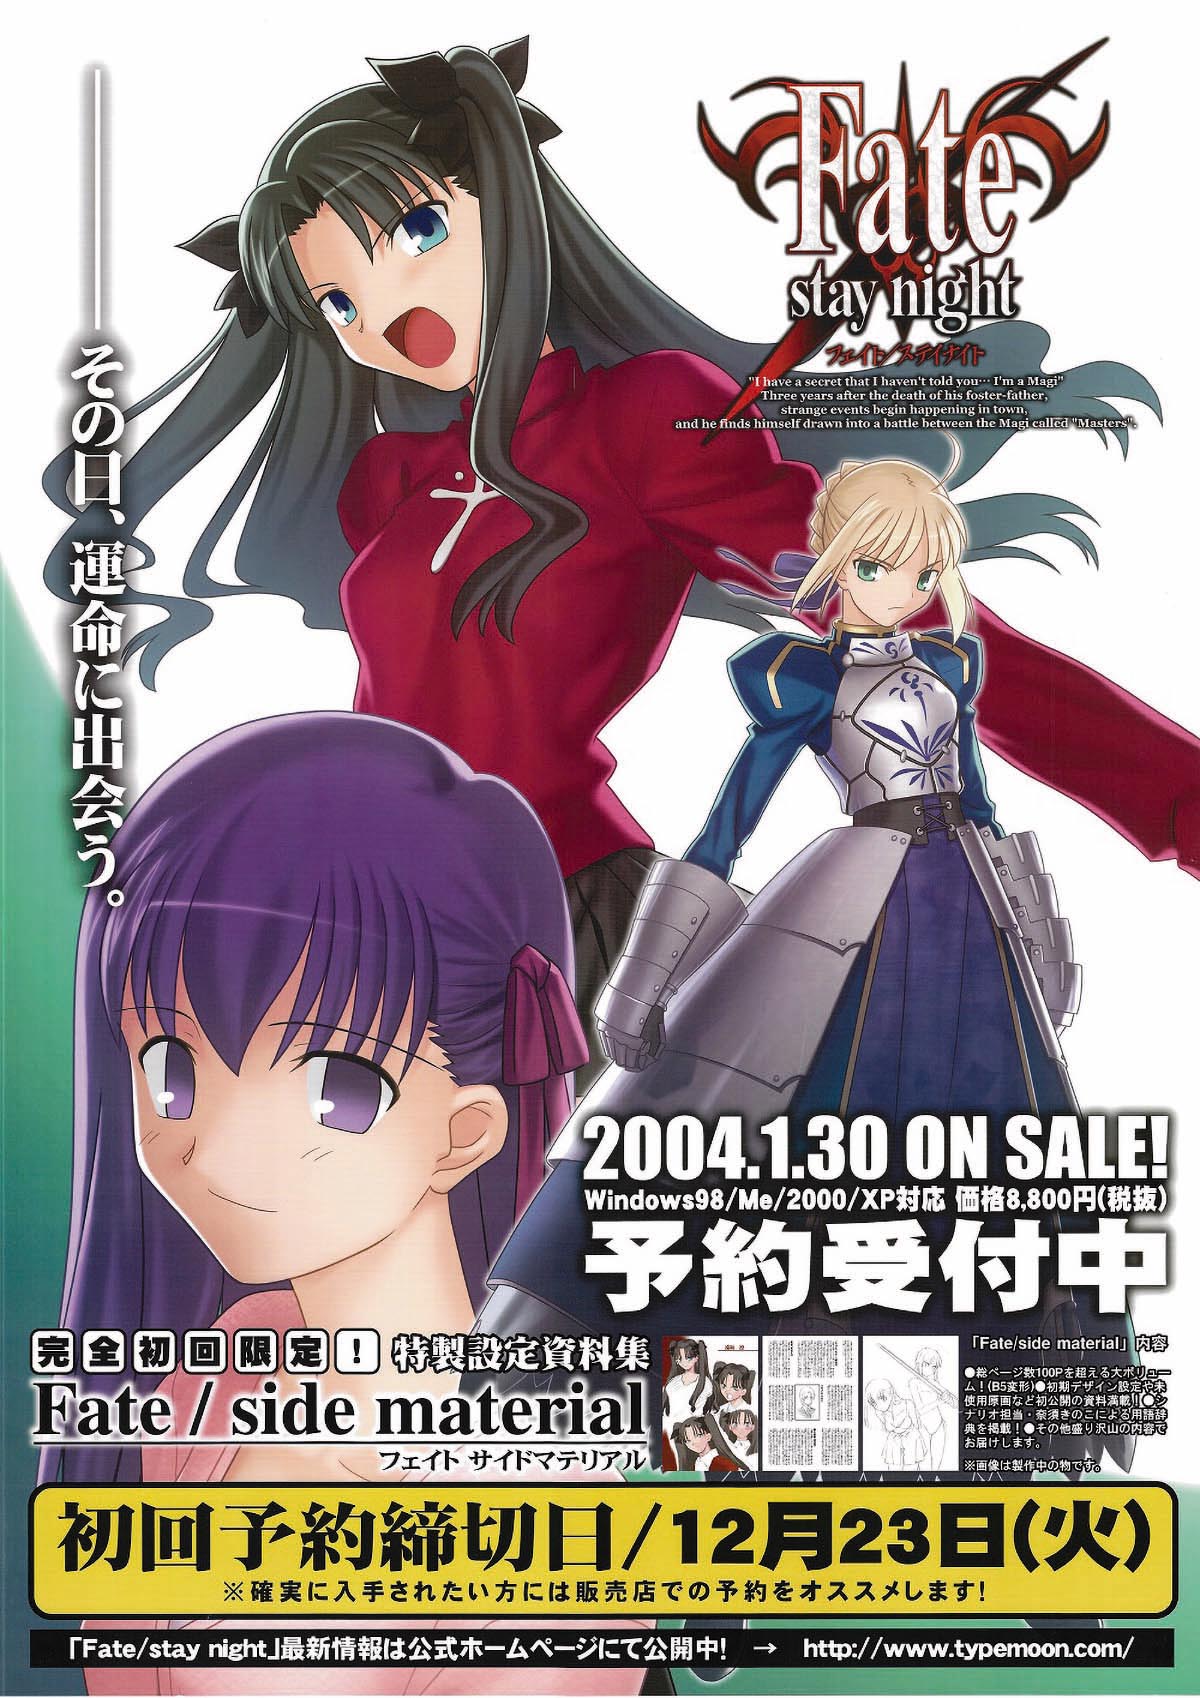 Fate Stay Night Pc Version Promotional Use Poster 2